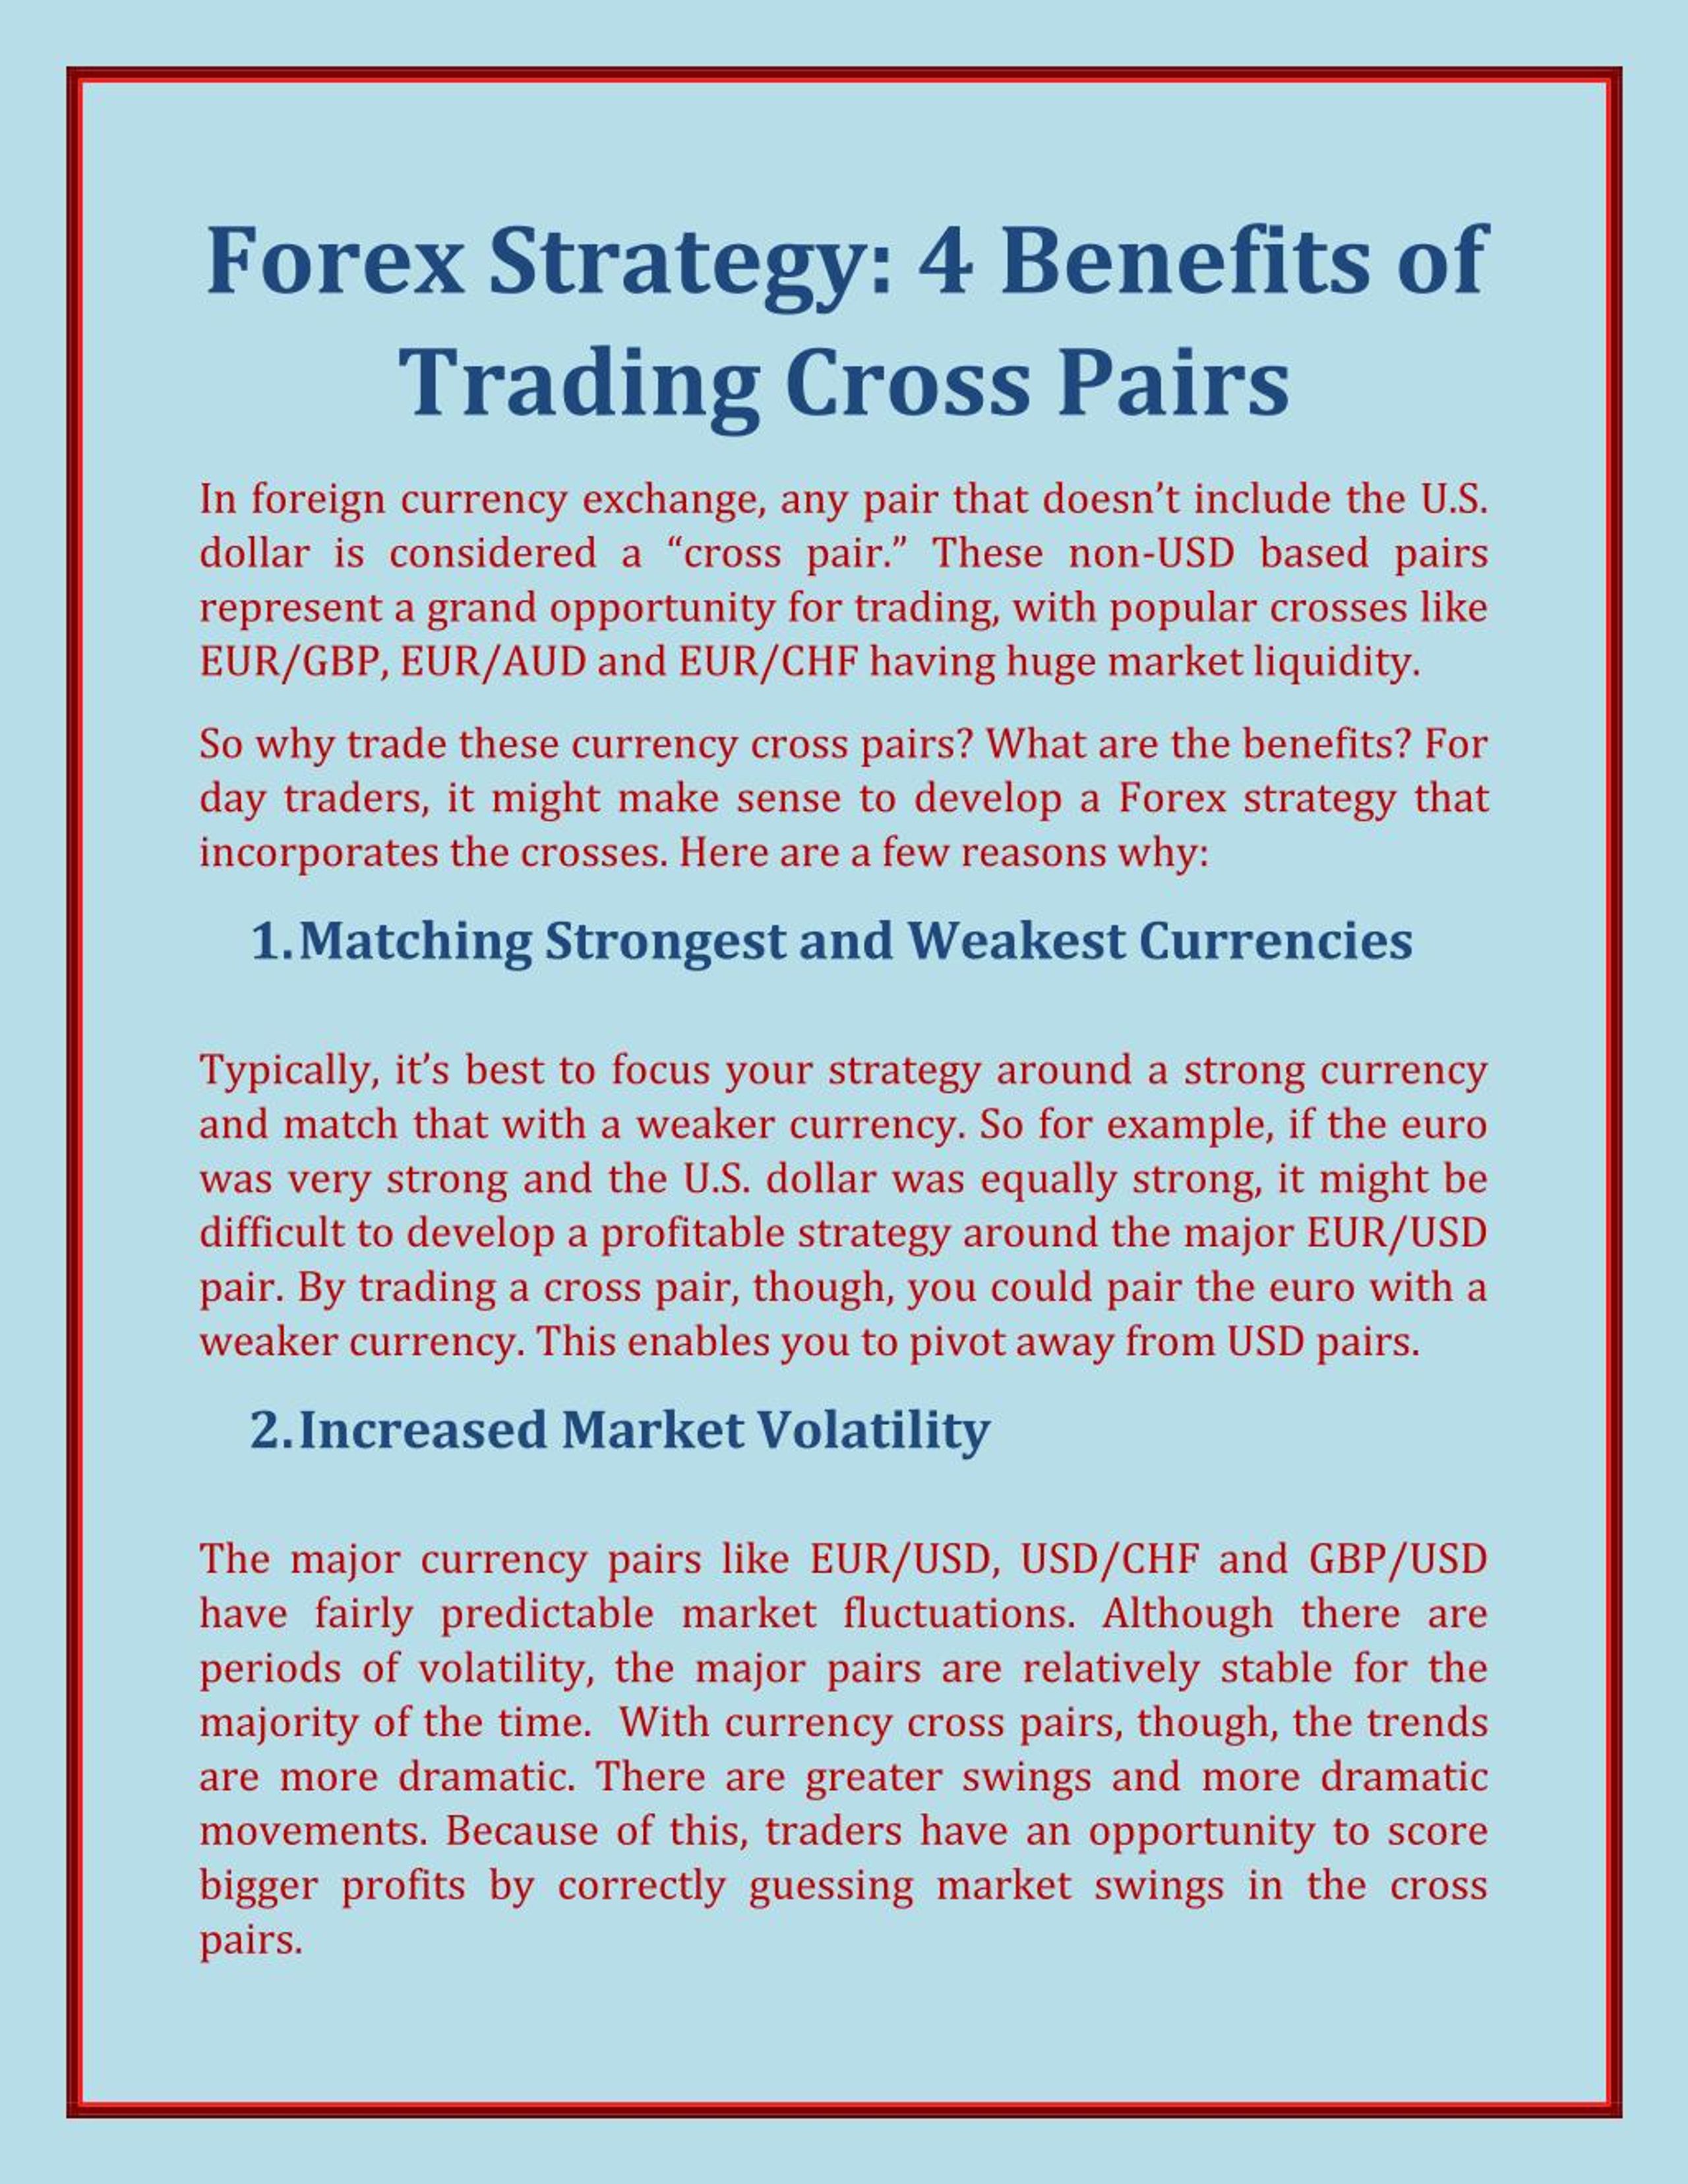 Ppt Forex Strategy 4 Benefits Of Trading Cross Pairs Powerpoint Presentation Id 7264062